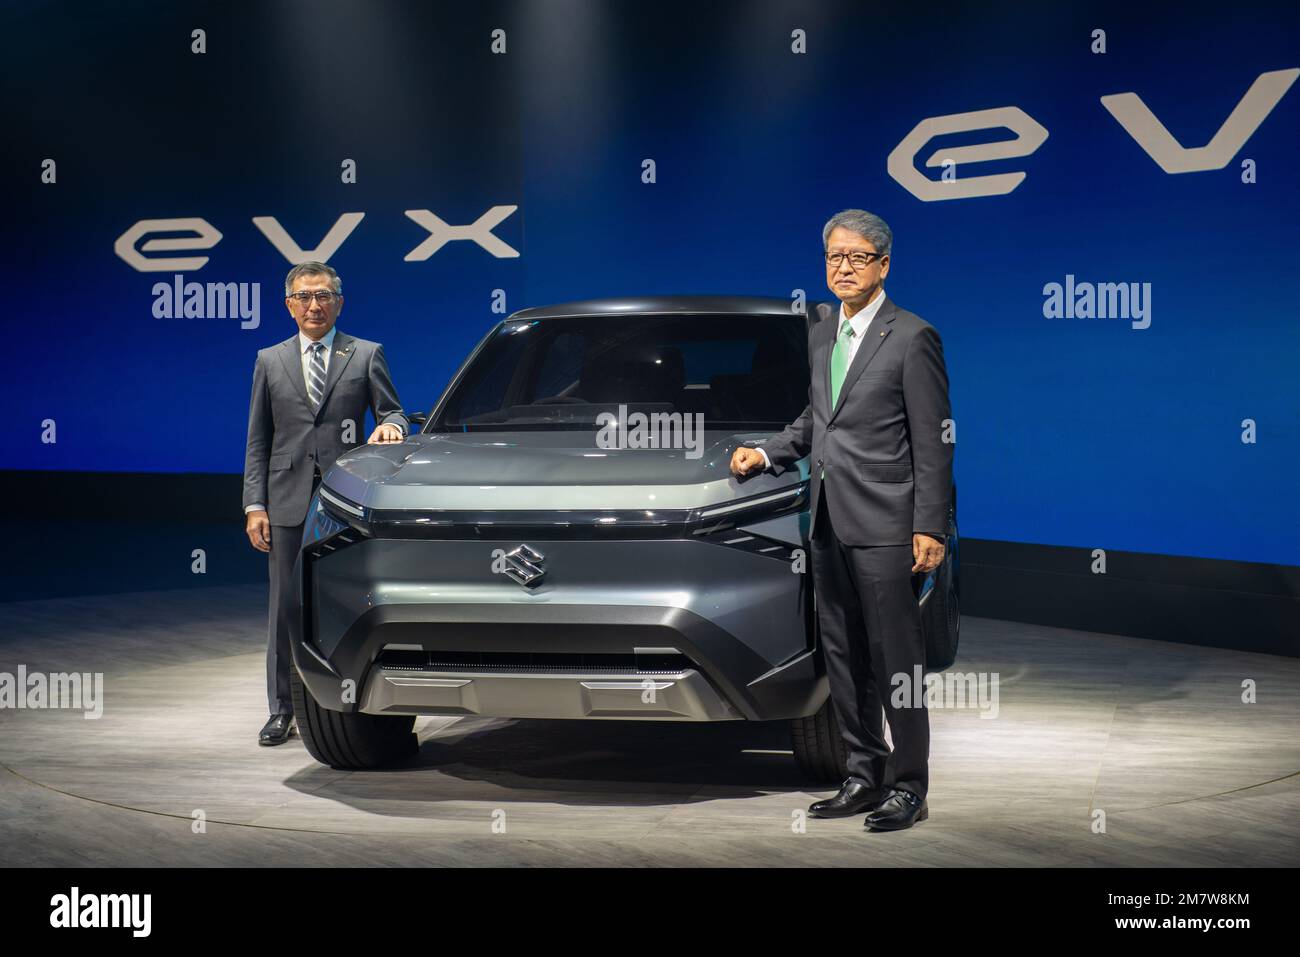 Greater Noida, India. 11th Jan, 2023. (L-R) Toshihiro Suzuki President Suzuki Motor Corp with Hisashi Takeuchi Managing Director of Maruti Suzuki pose with Concept car EVX SUV at the Auto Expo 2023 in Greater Noida. Credit: SOPA Images Limited/Alamy Live News Stock Photo